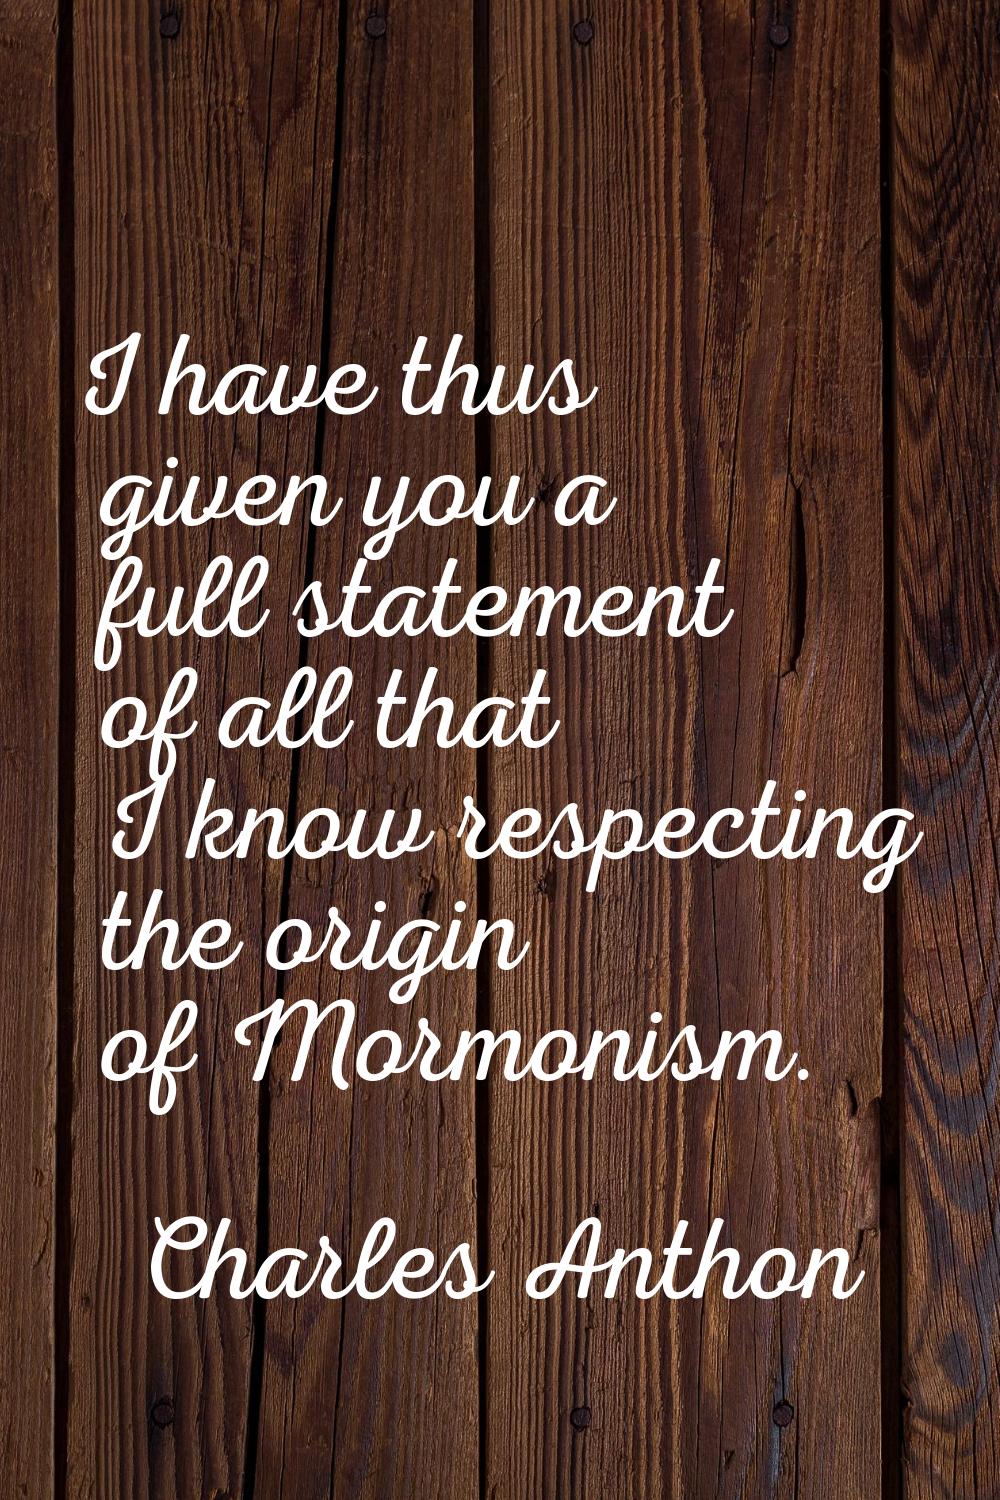 I have thus given you a full statement of all that I know respecting the origin of Mormonism.